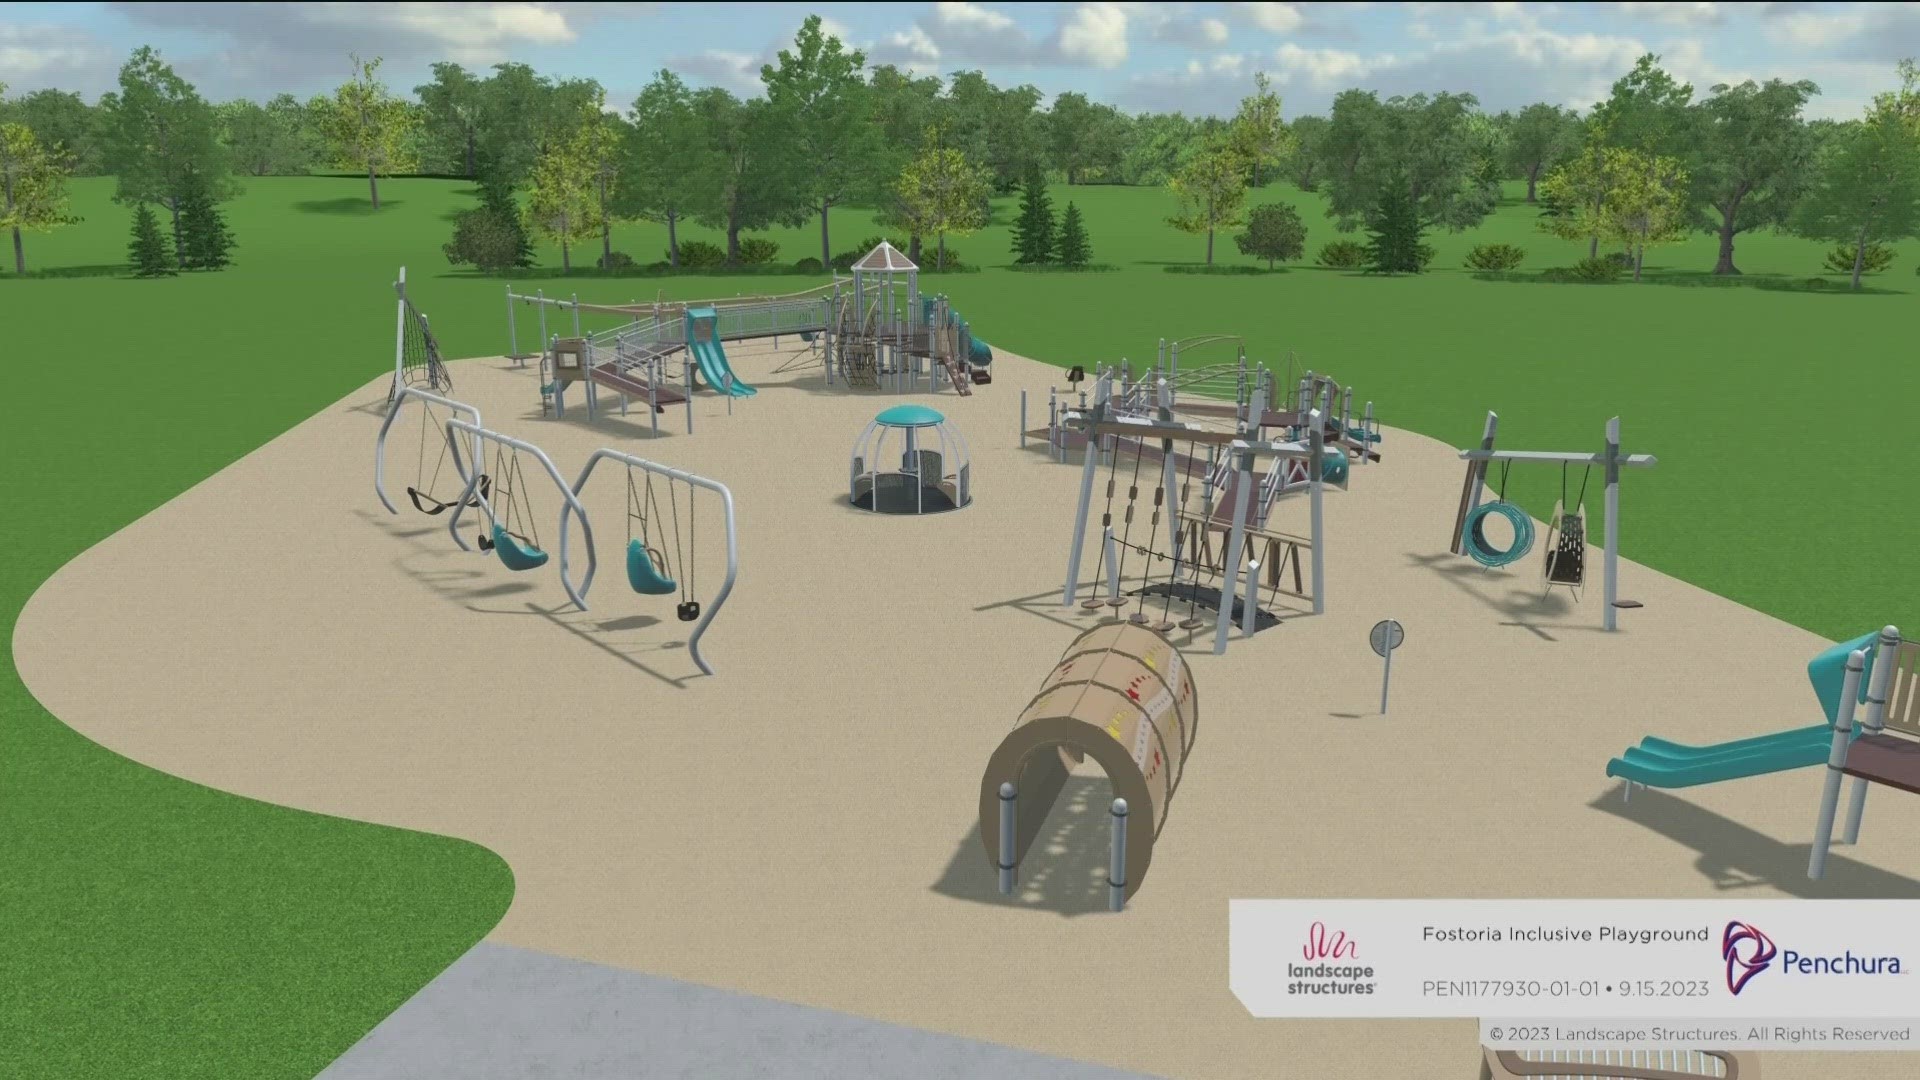 Wood County Plays announced the construction of the playground Wednesday.